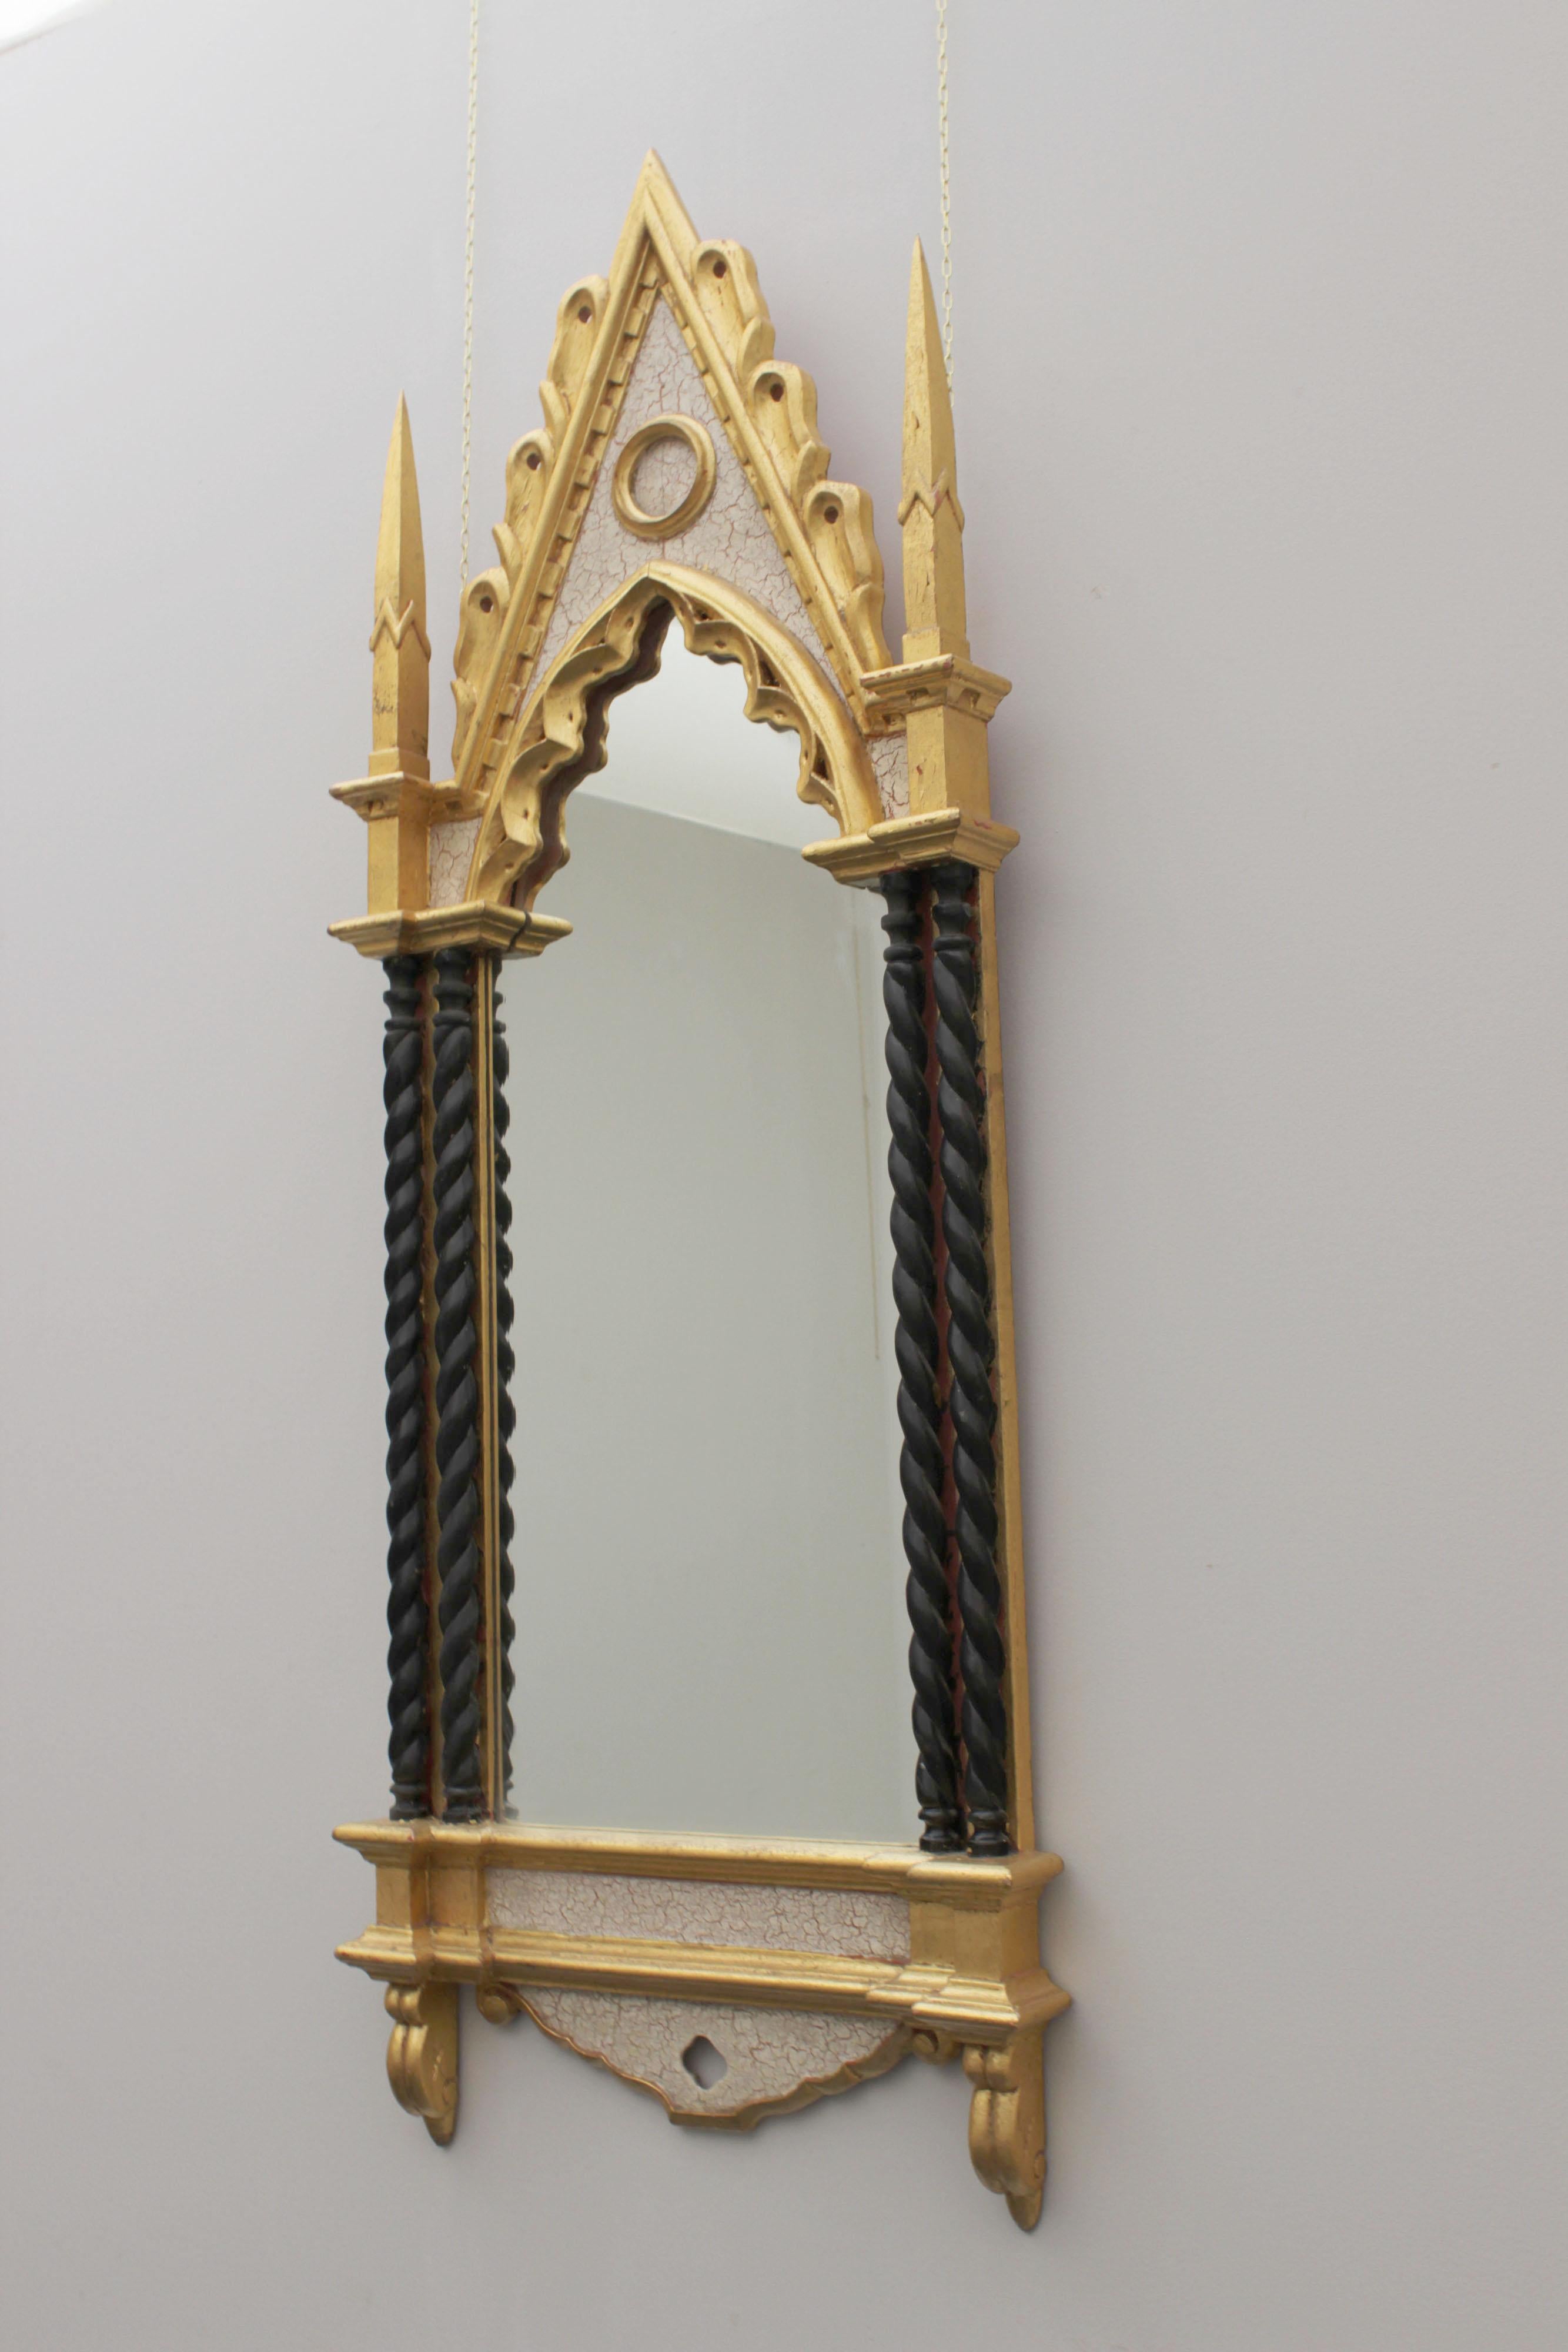 Vintage Italian Neo Gothic mirror, 70's
Wonderful eclectic neo-gothic interpretation, carved and gilded wood on bolus, lacquered. The excellent ivory lacquering and the craquele effect that reveals the red background of the bolus. The twisted